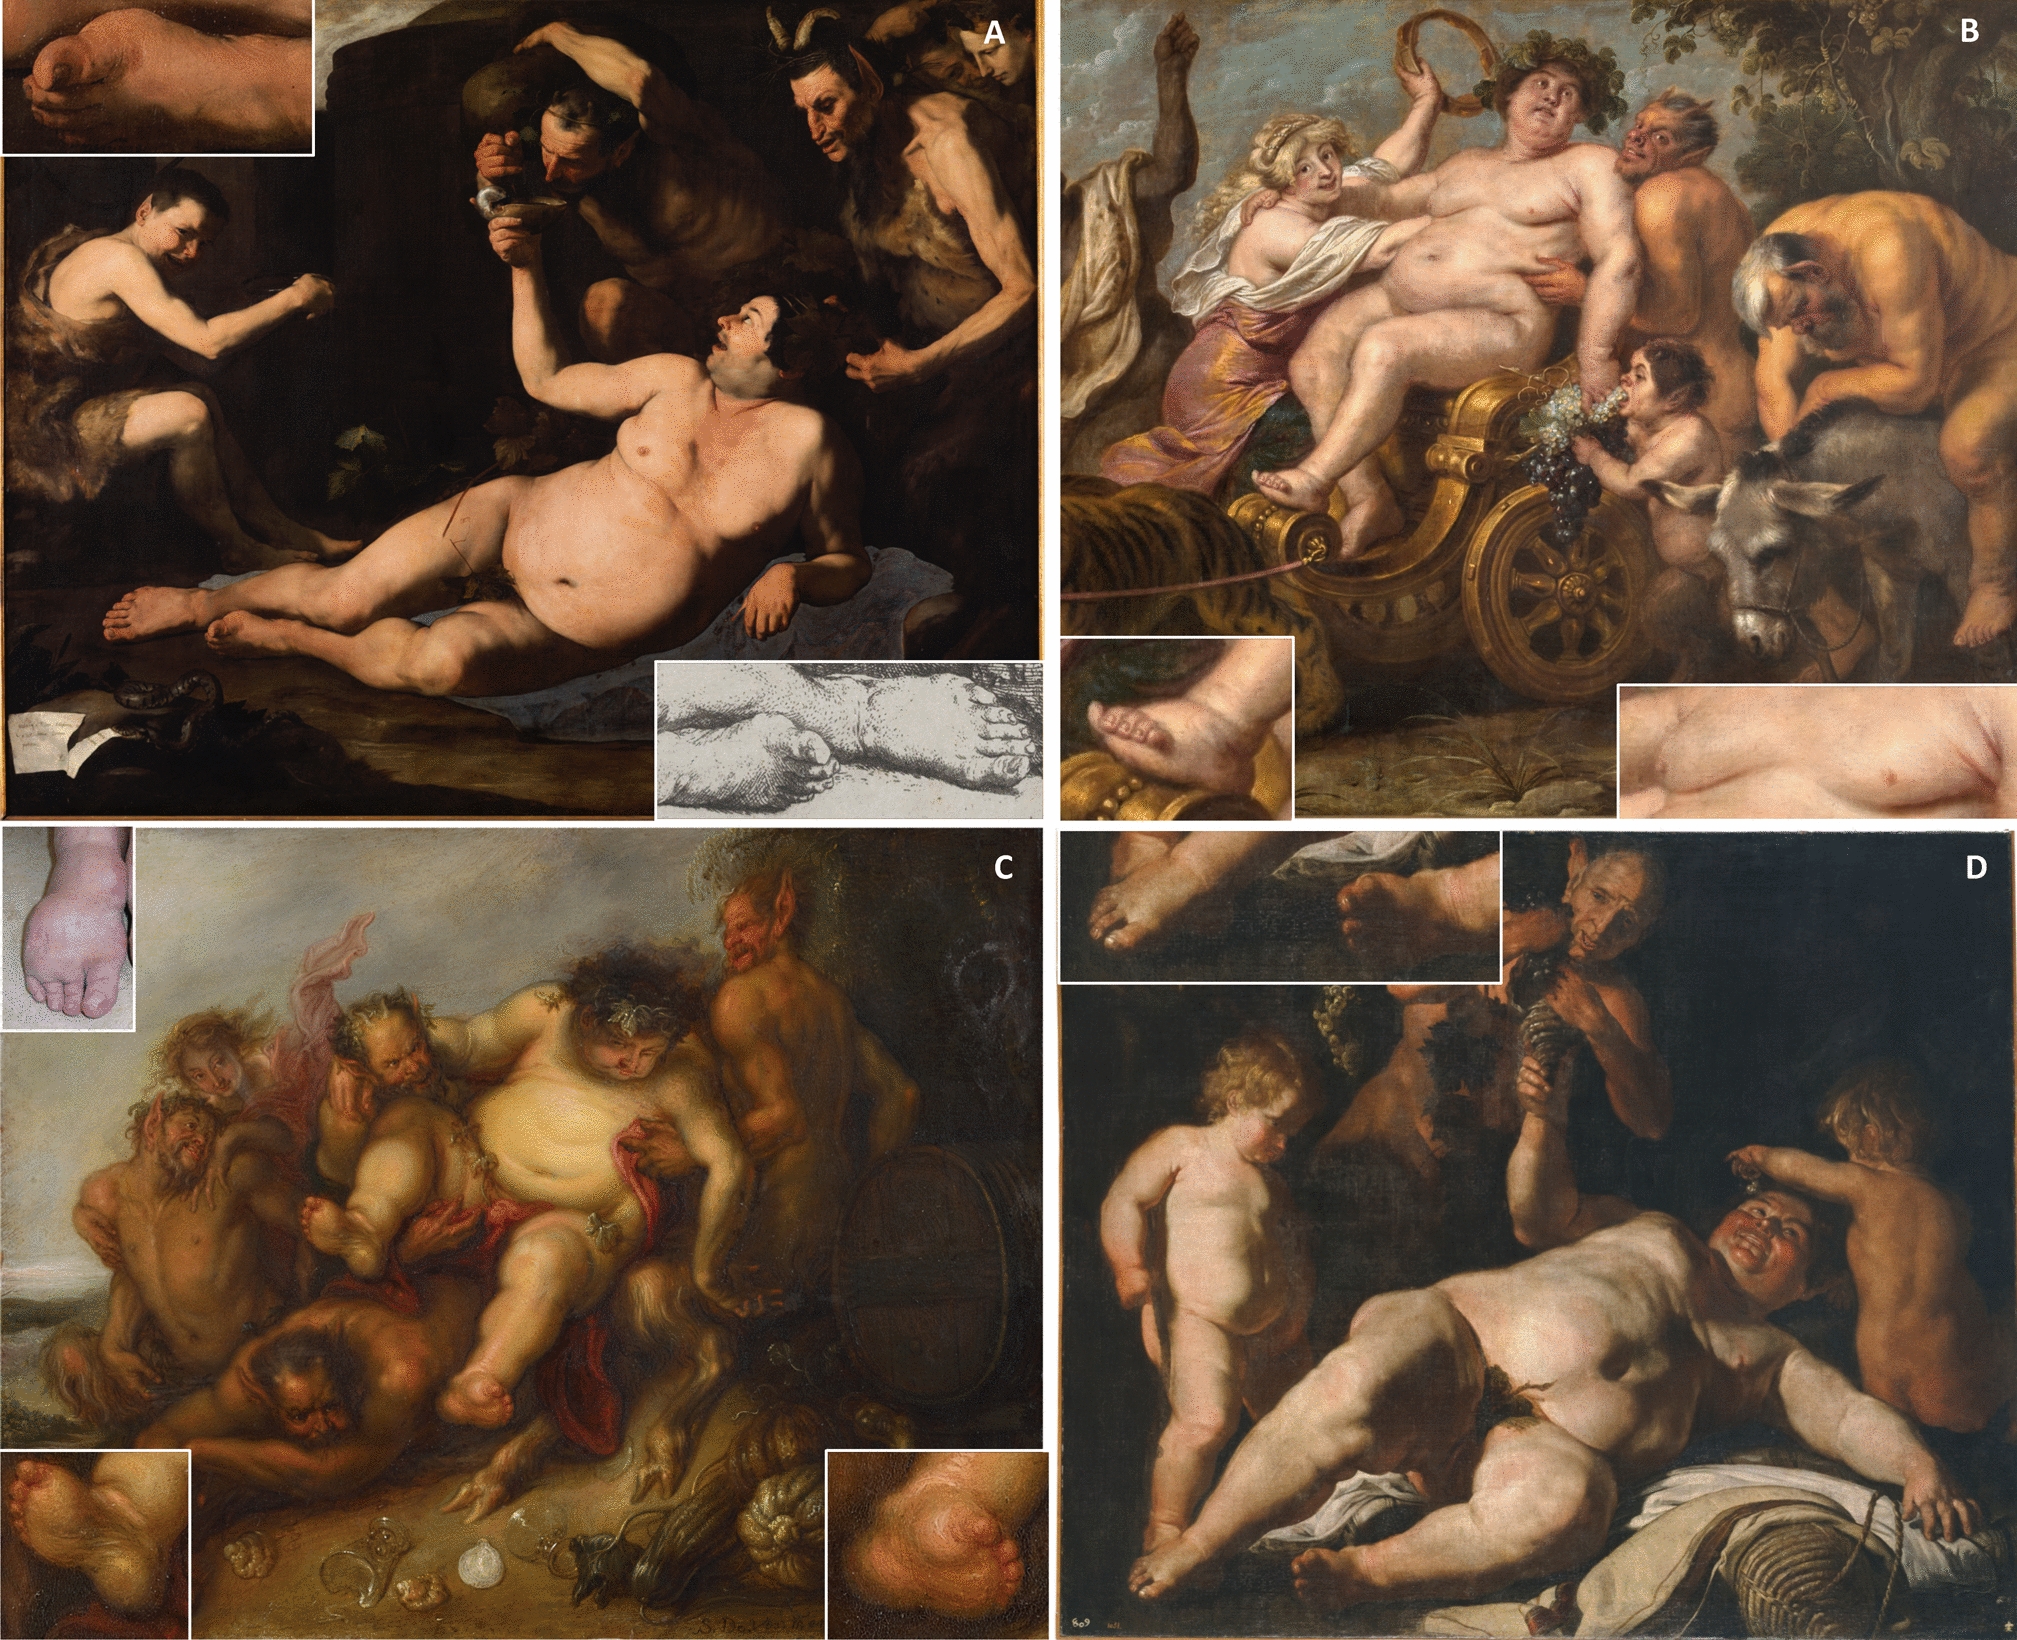 Exposure to alcohol or lead? Chronic gout in baroque depictions of obese Silenus and Bacchus